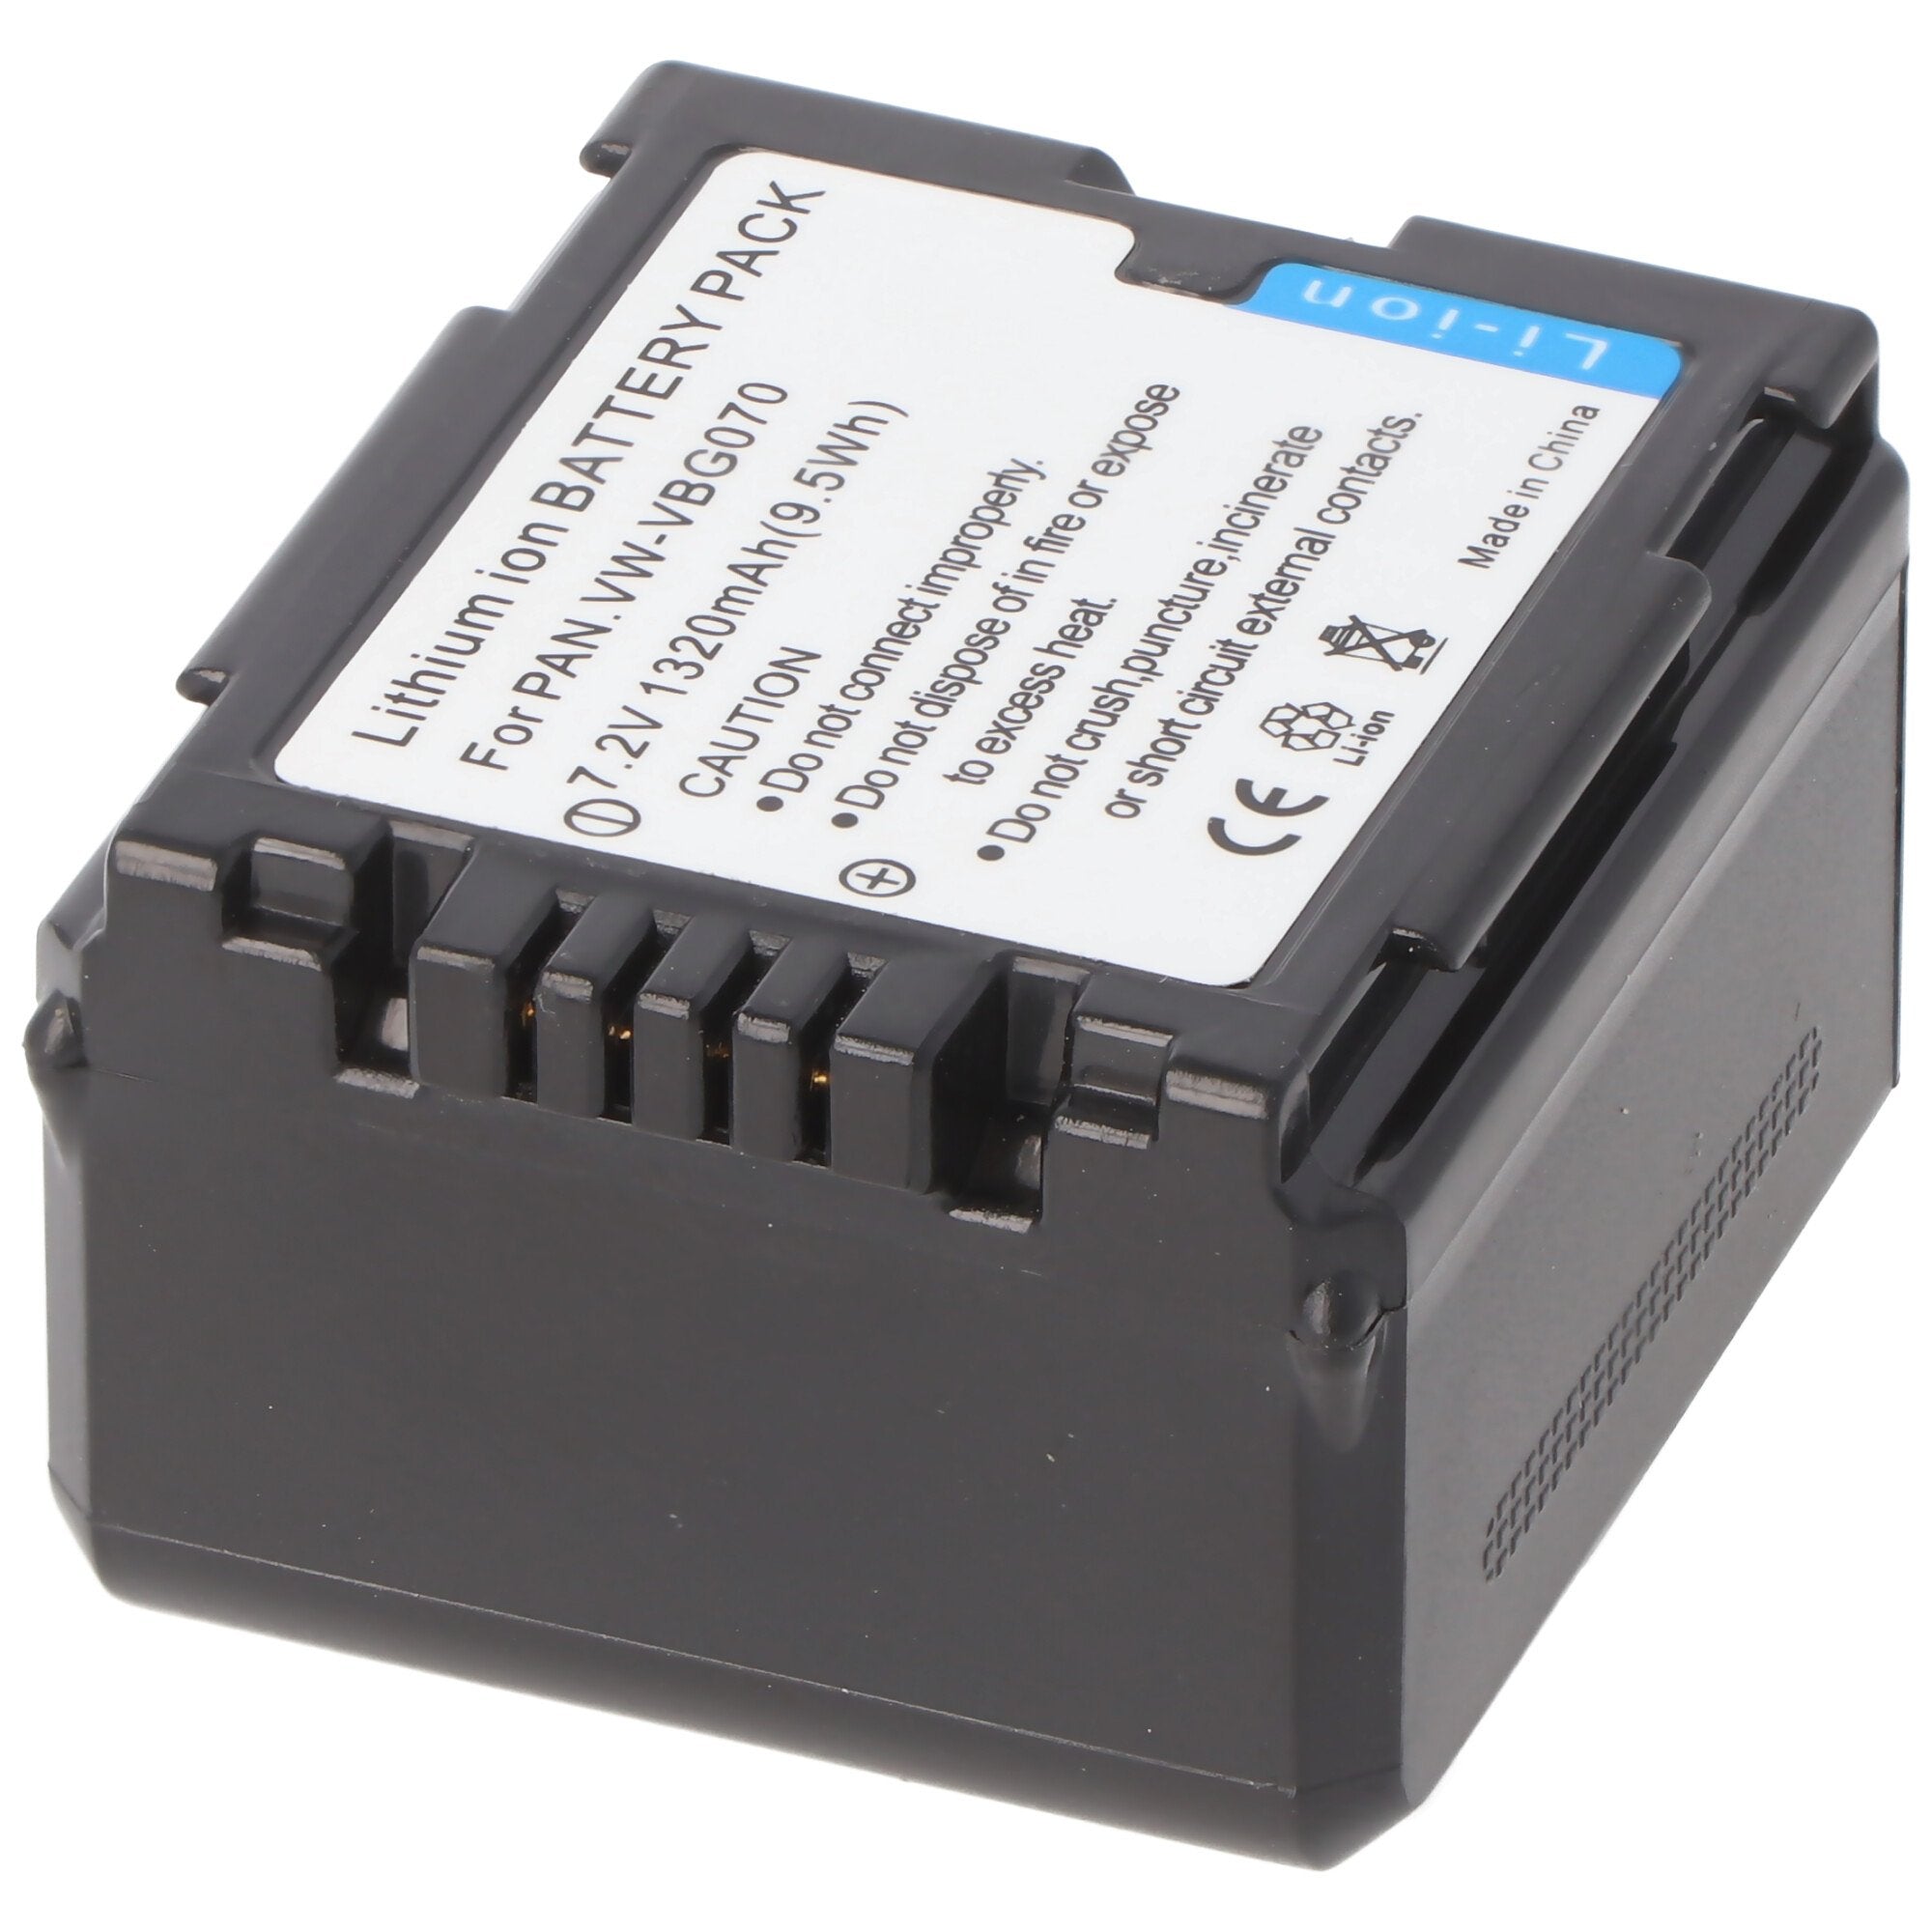 Battery suitable for Panasonic VW-VBG130 battery with current software